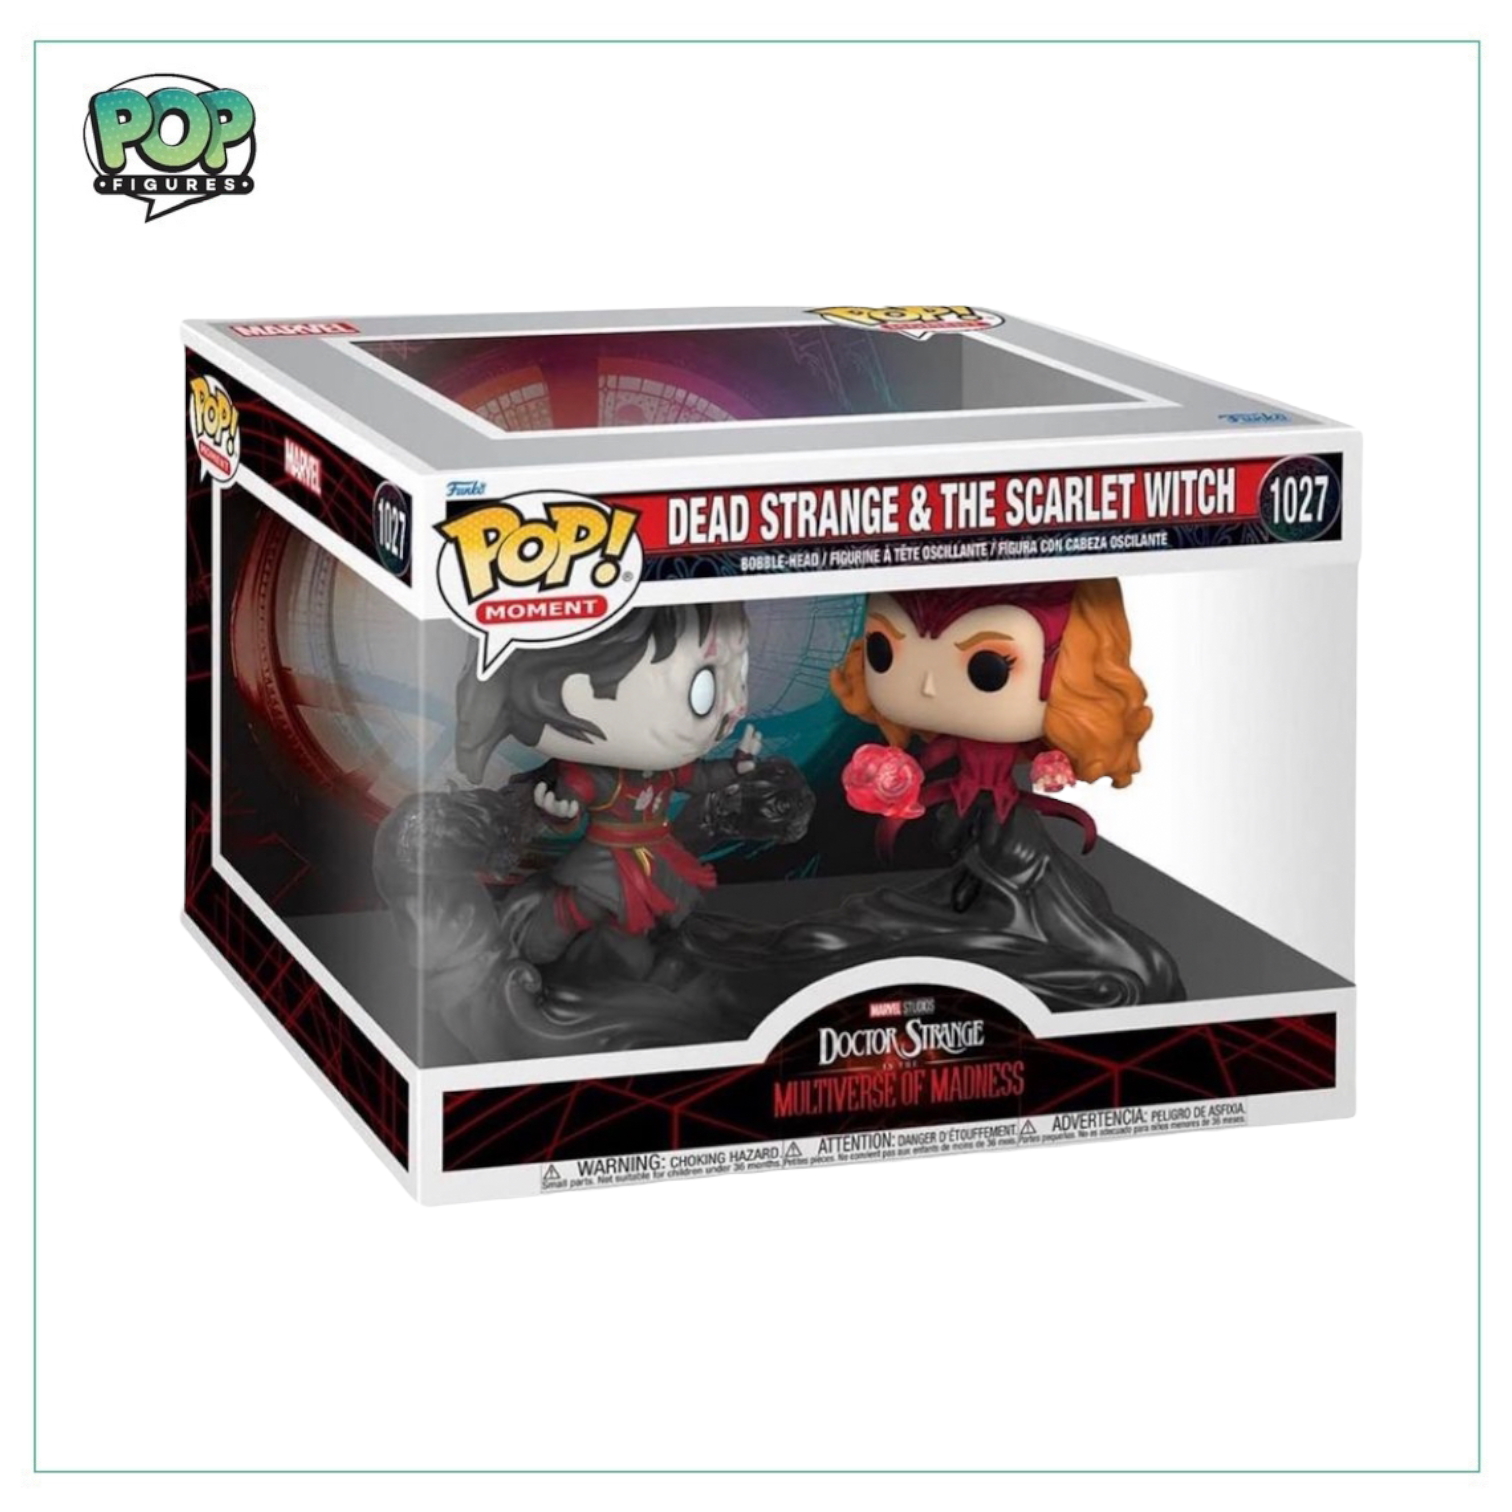 Dead Strange & The Scarlet Witch #1027 Funko Pop! - Moment Dr. Strange and the Multiverse of Madness